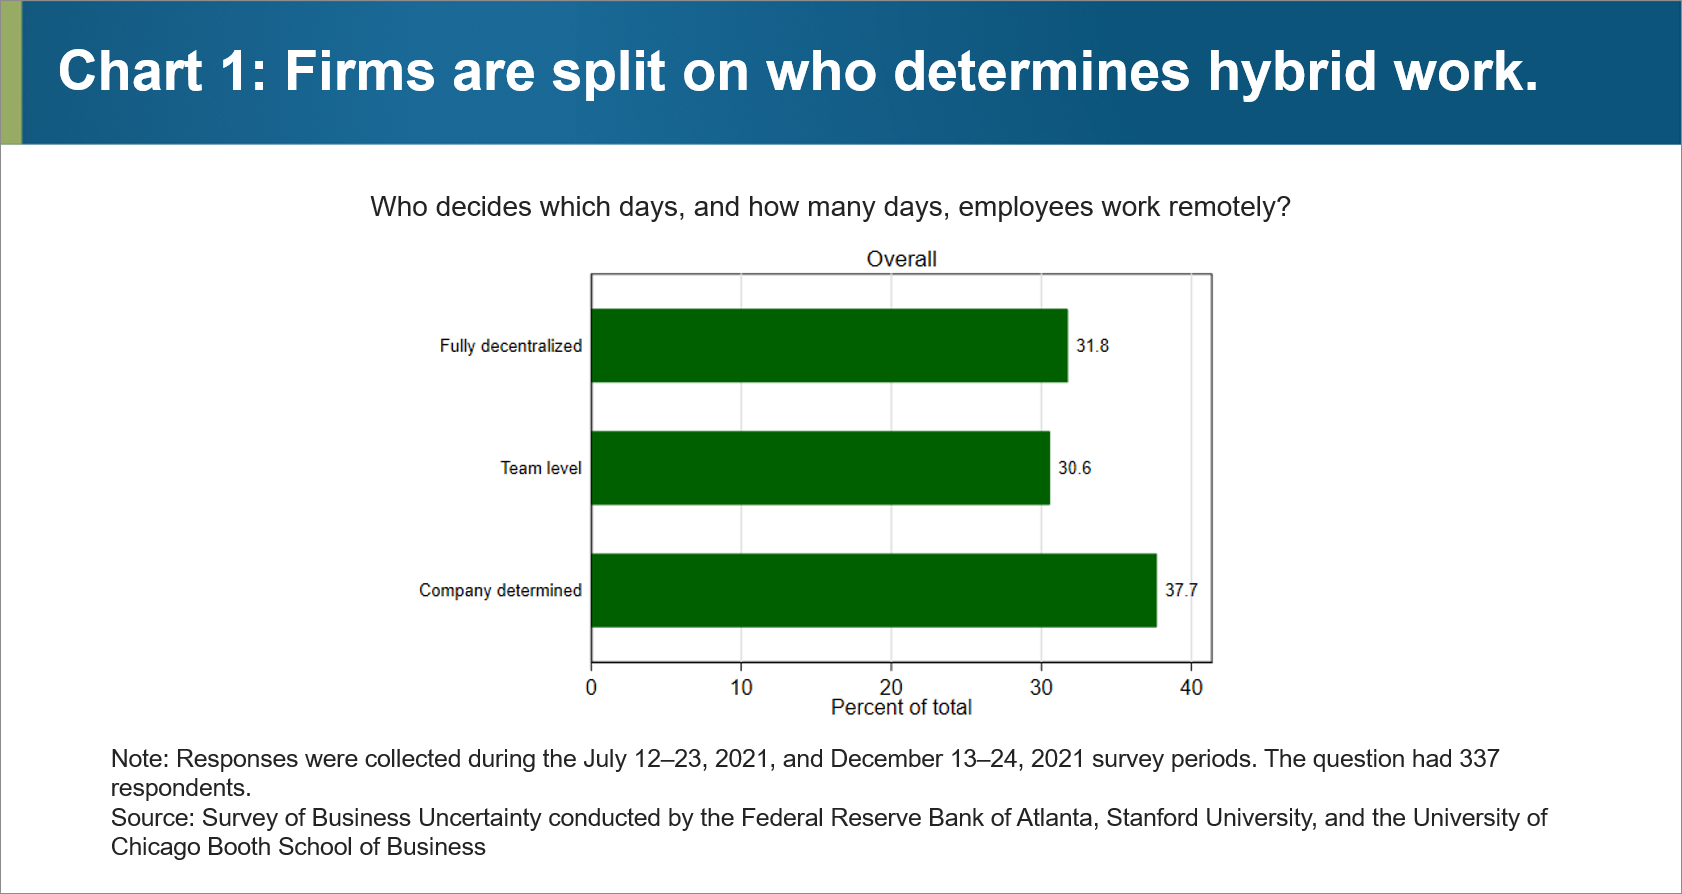 Chart 1: Firms are split on who determines hybrid work